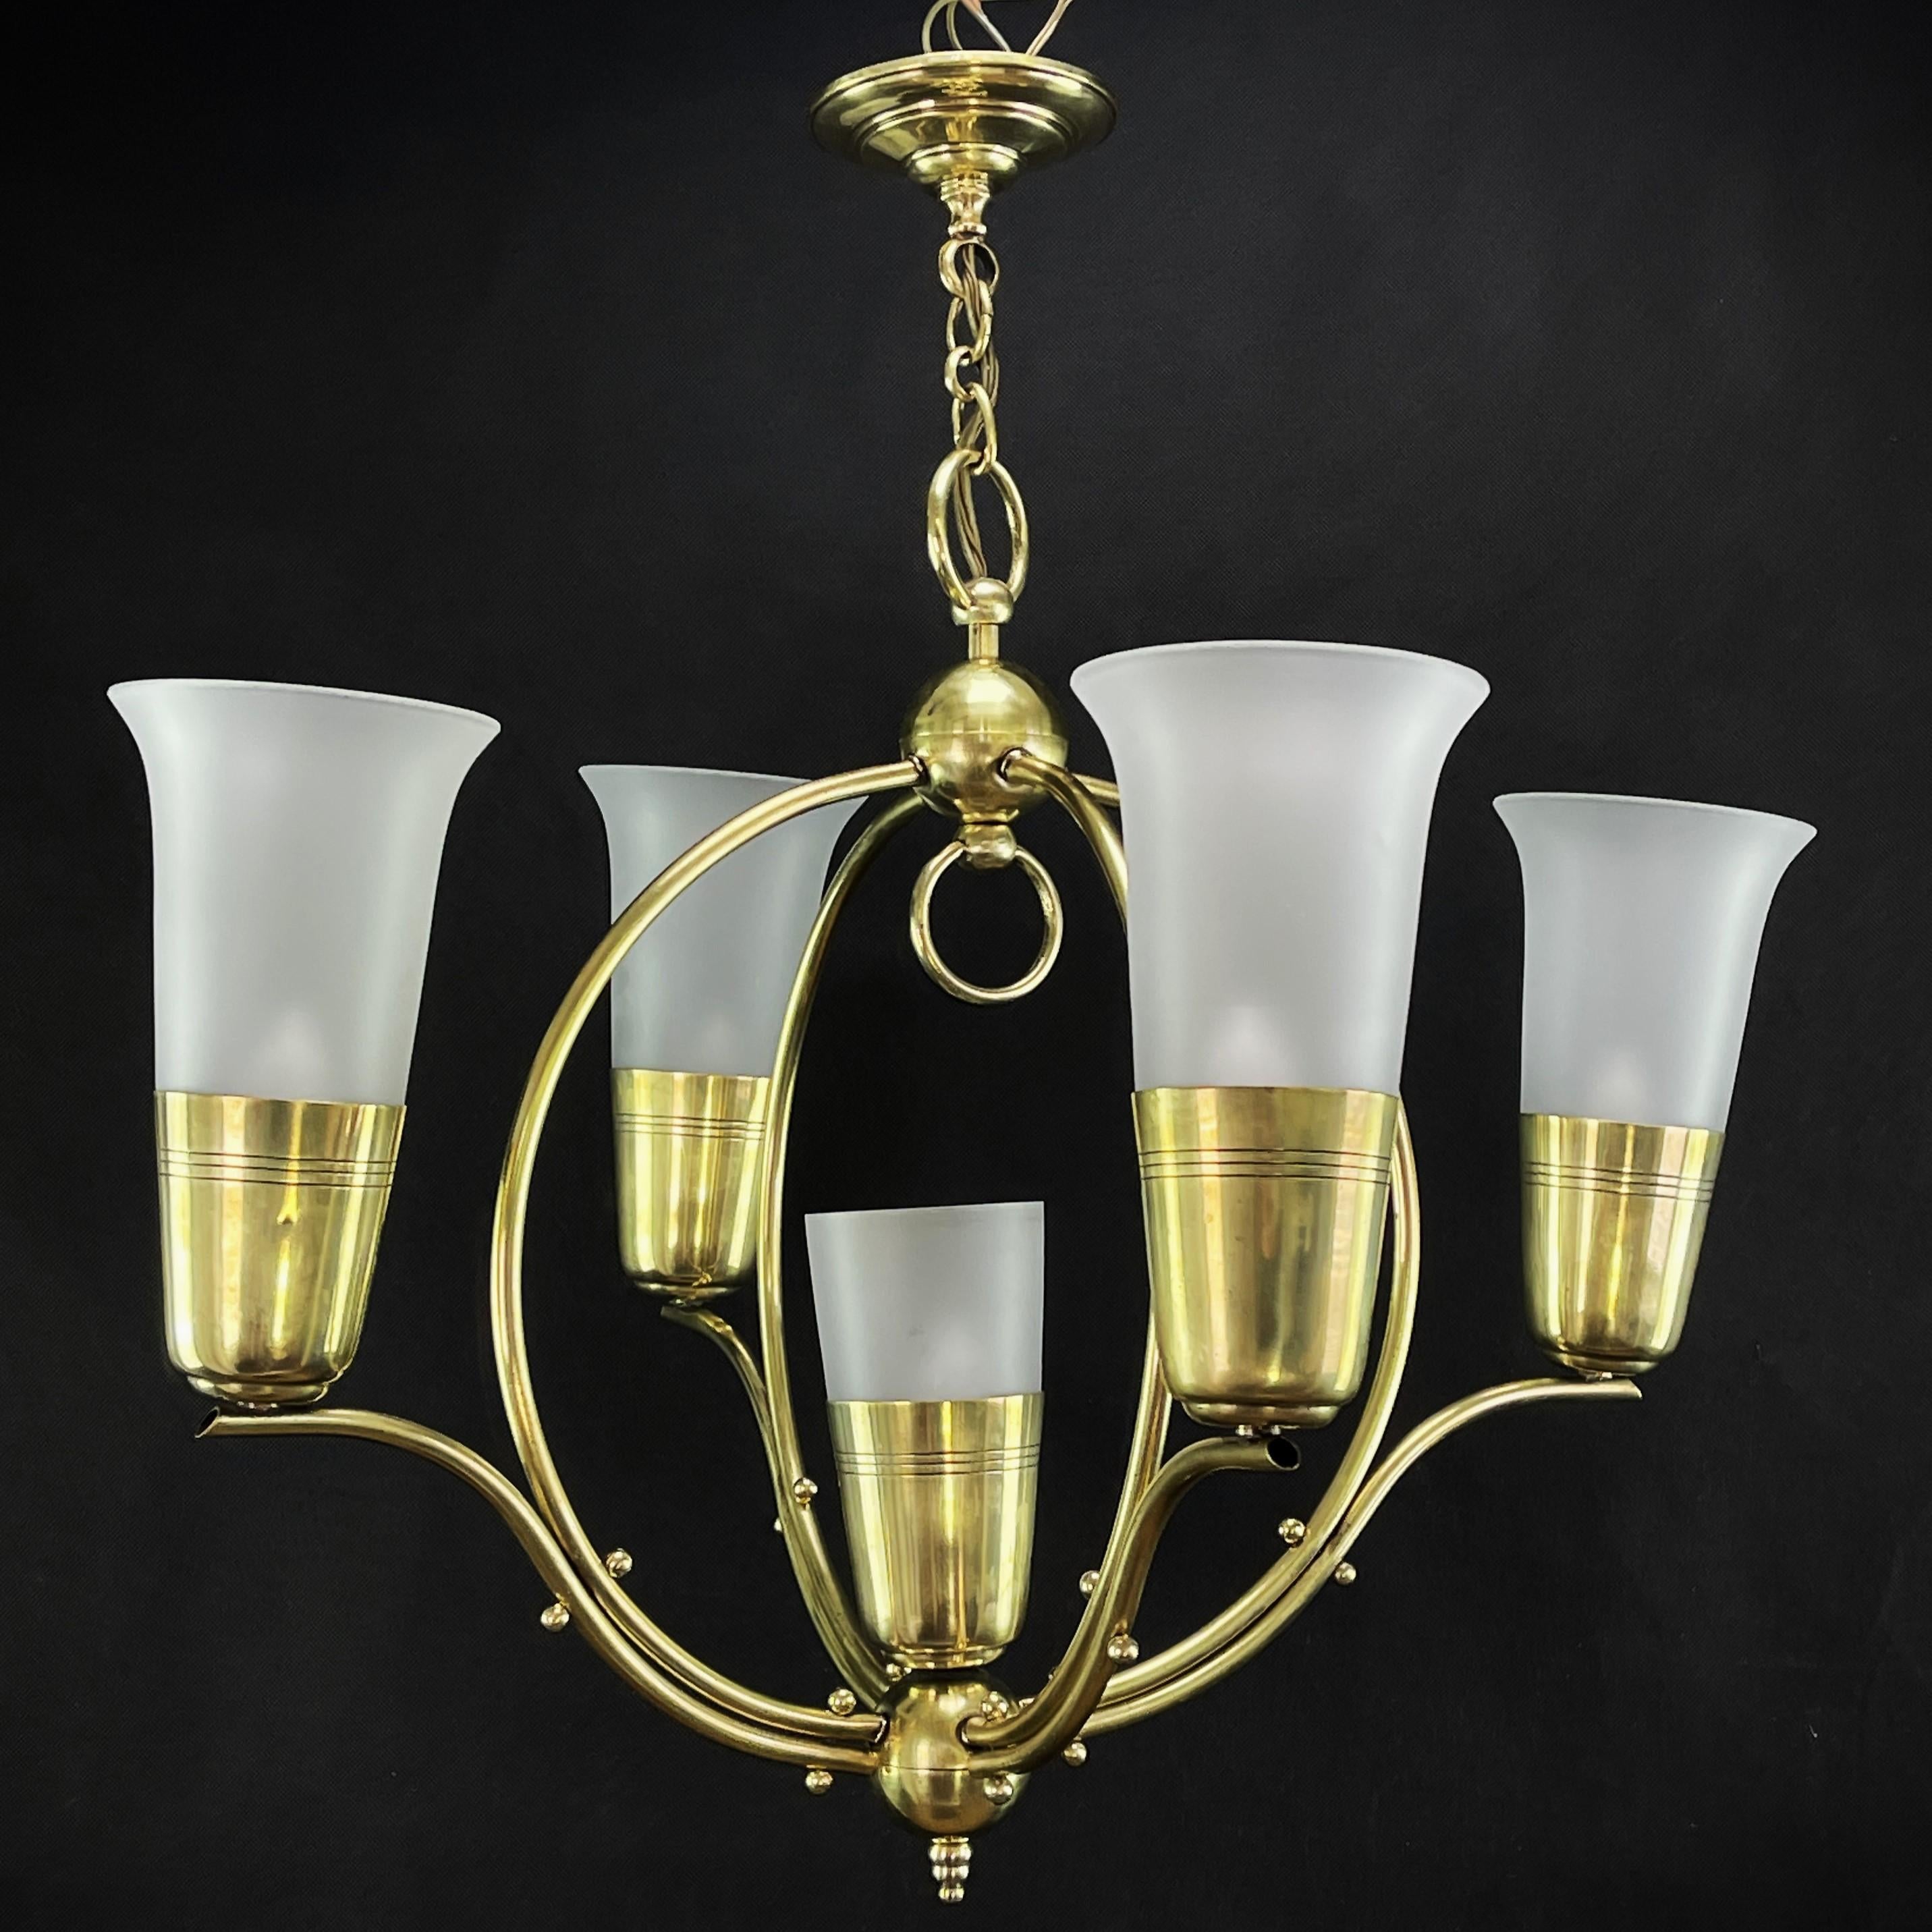 geometric ART DECO hanging lamp

Art Deco brass ceiling lamp: a timeless combination of elegance and style.
These stunning Art Deco hanging lamps made of high-quality brass are a real eye-catcher for any room. With their ornate design in the